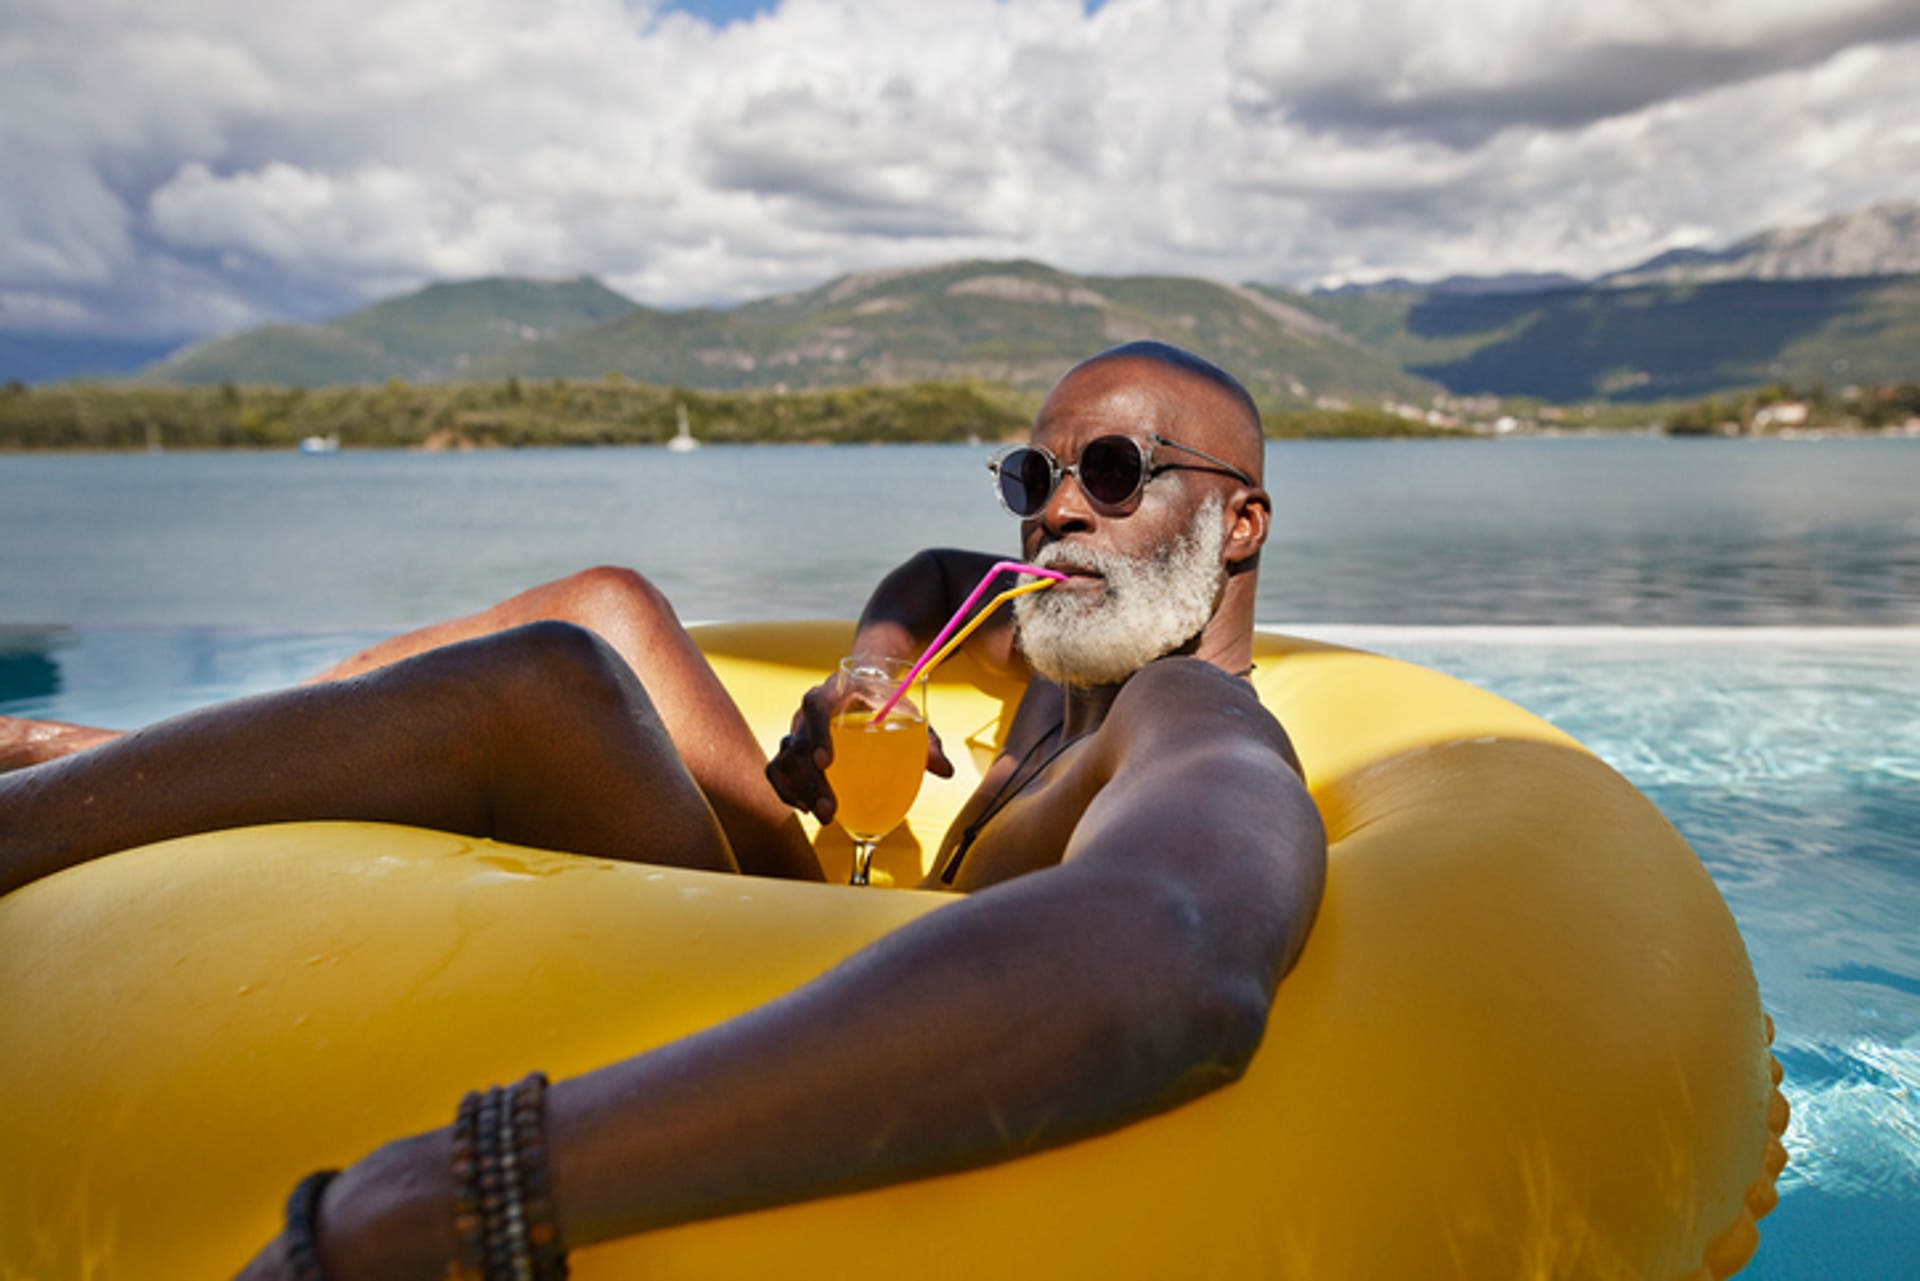  Senior man wearing sunglasses while drinking juice in inflatable ring during vacation 